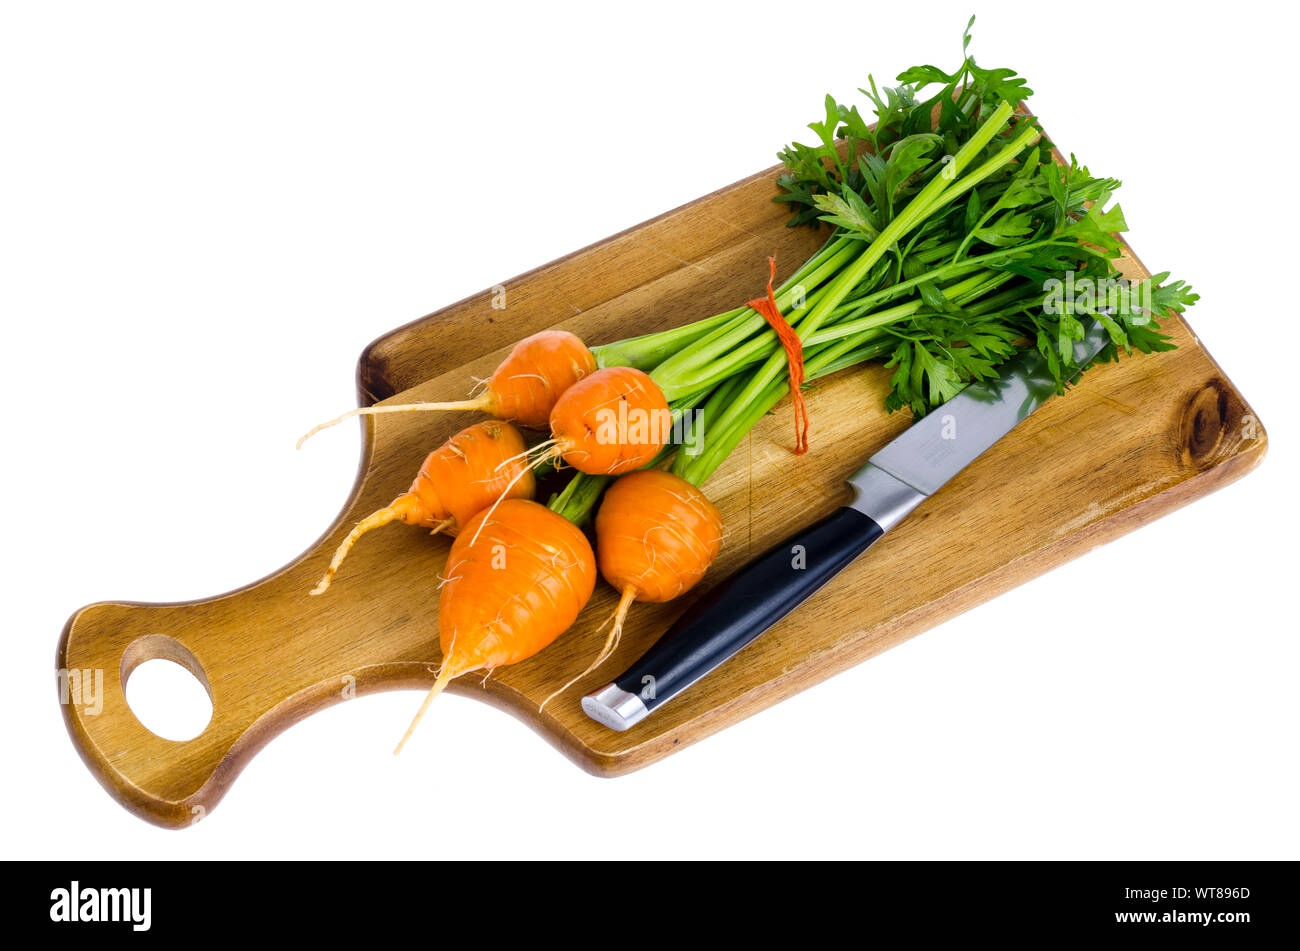 Bunch of small, round carrots (Parisian Heirloom Carrots) on wooden background. Studio Photo Stock Photo